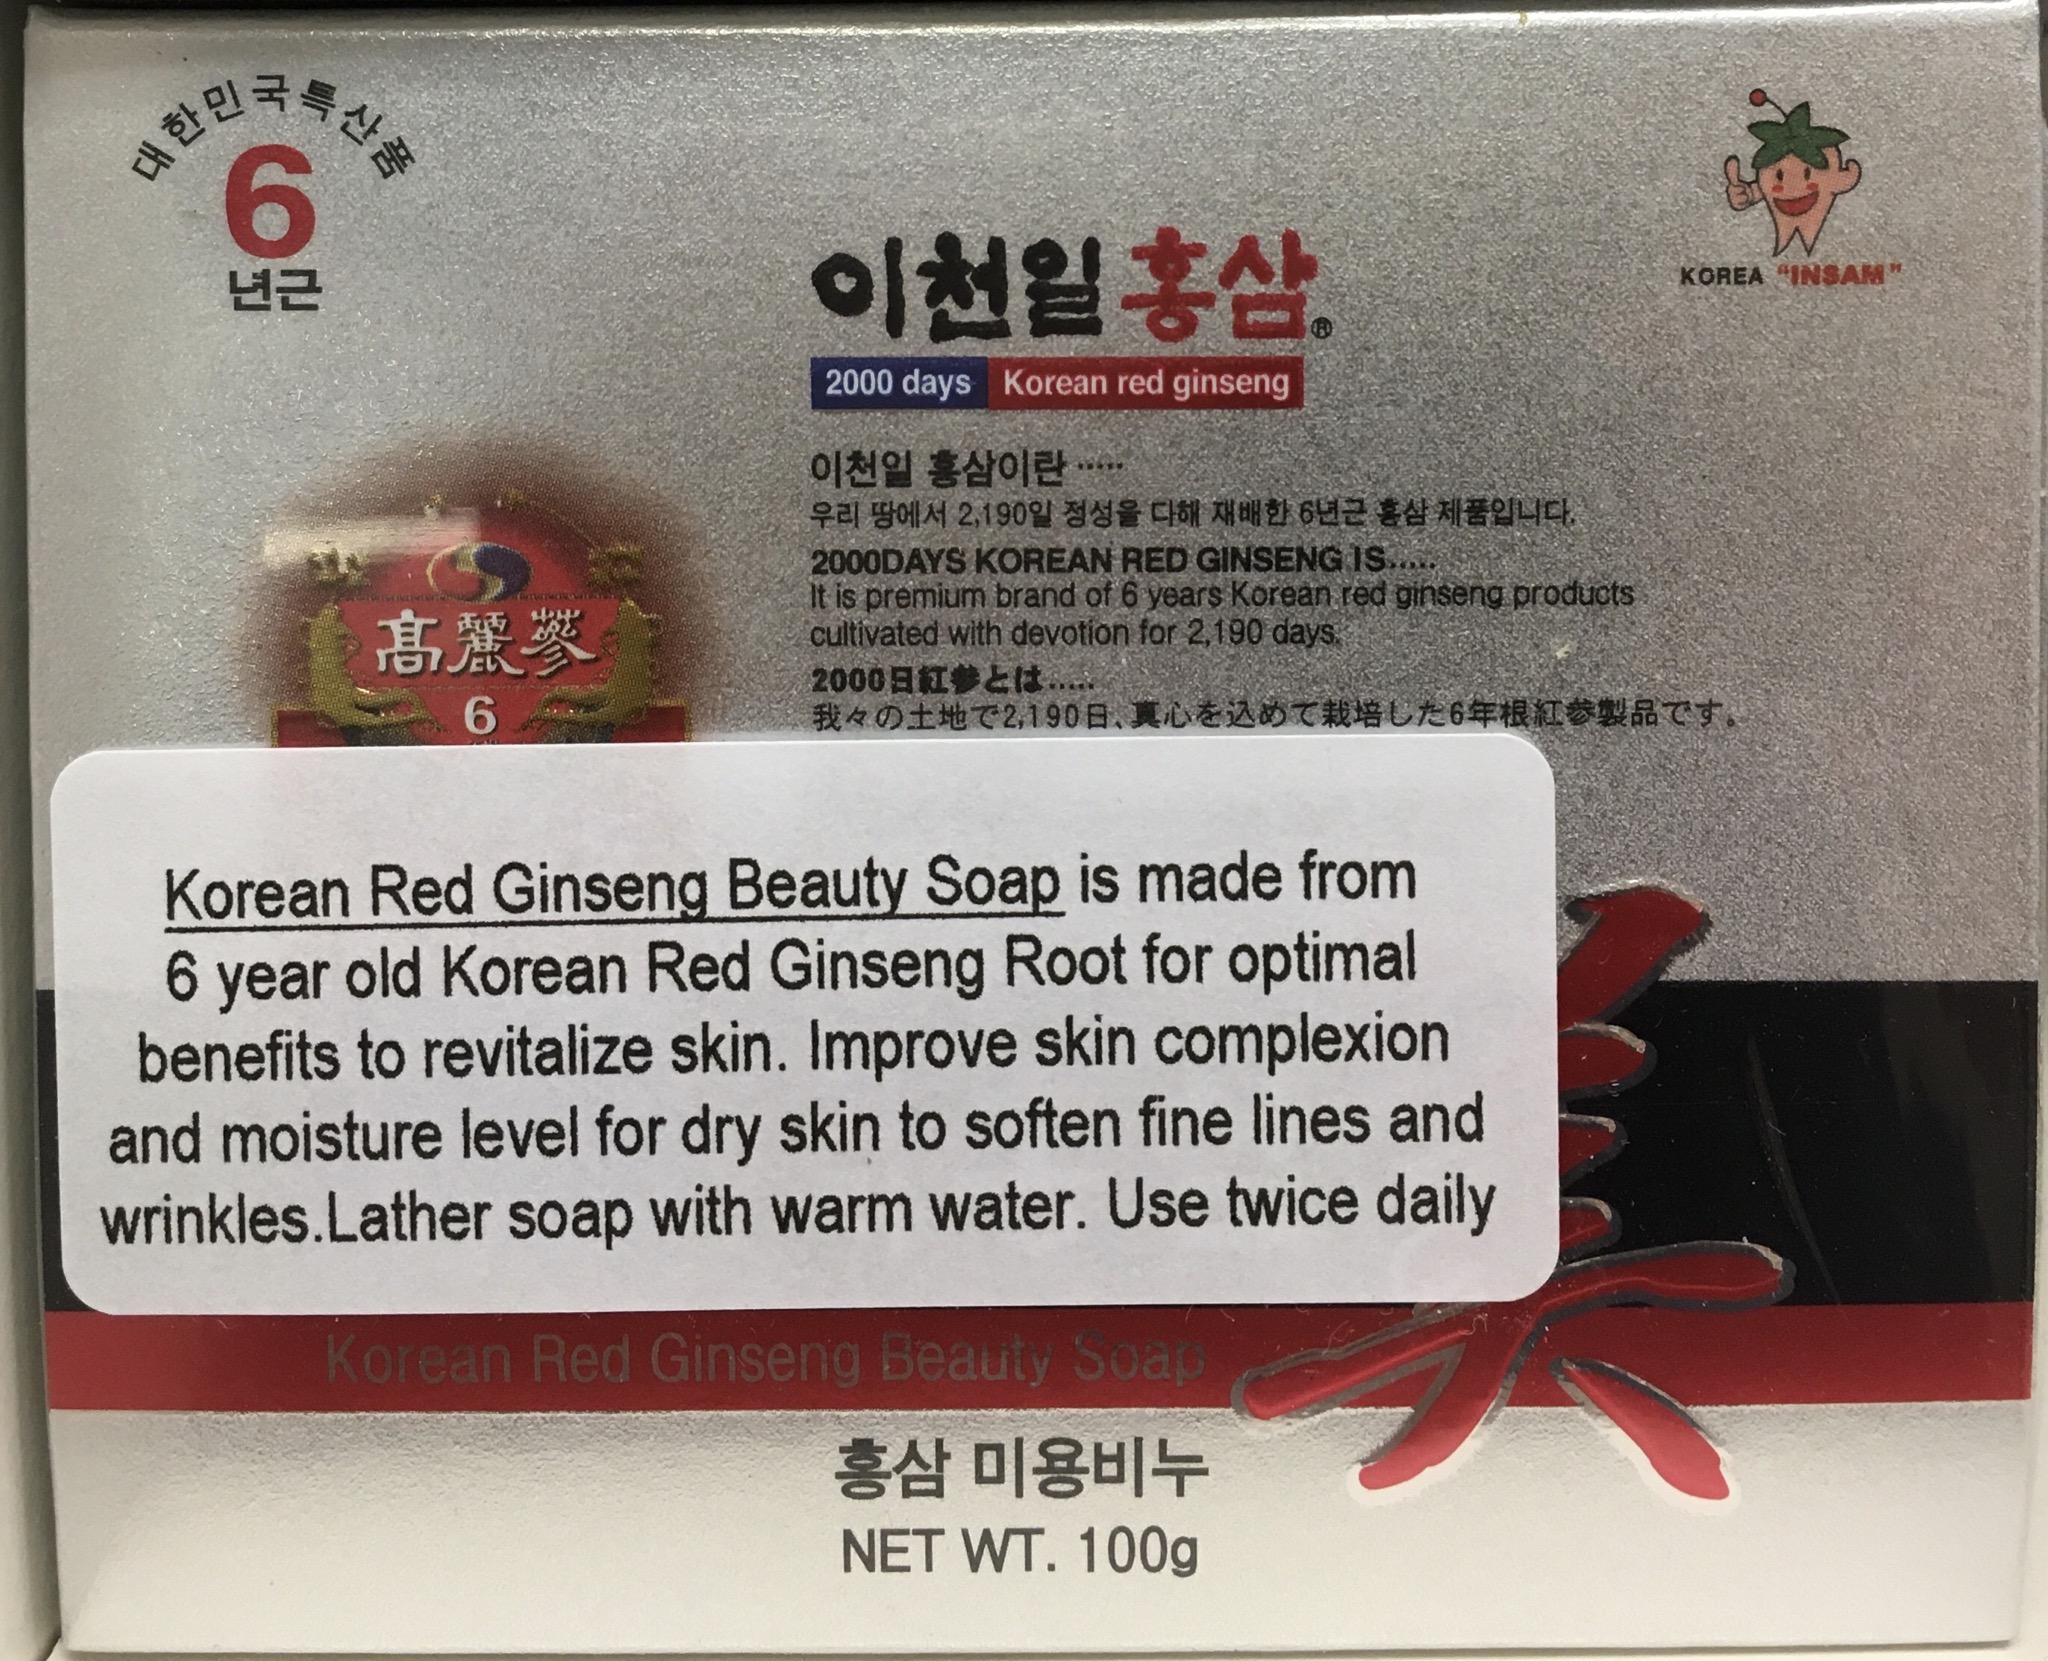 Korean Red Ginseng Beauty Soap (Buy 3, Get 1 Free)